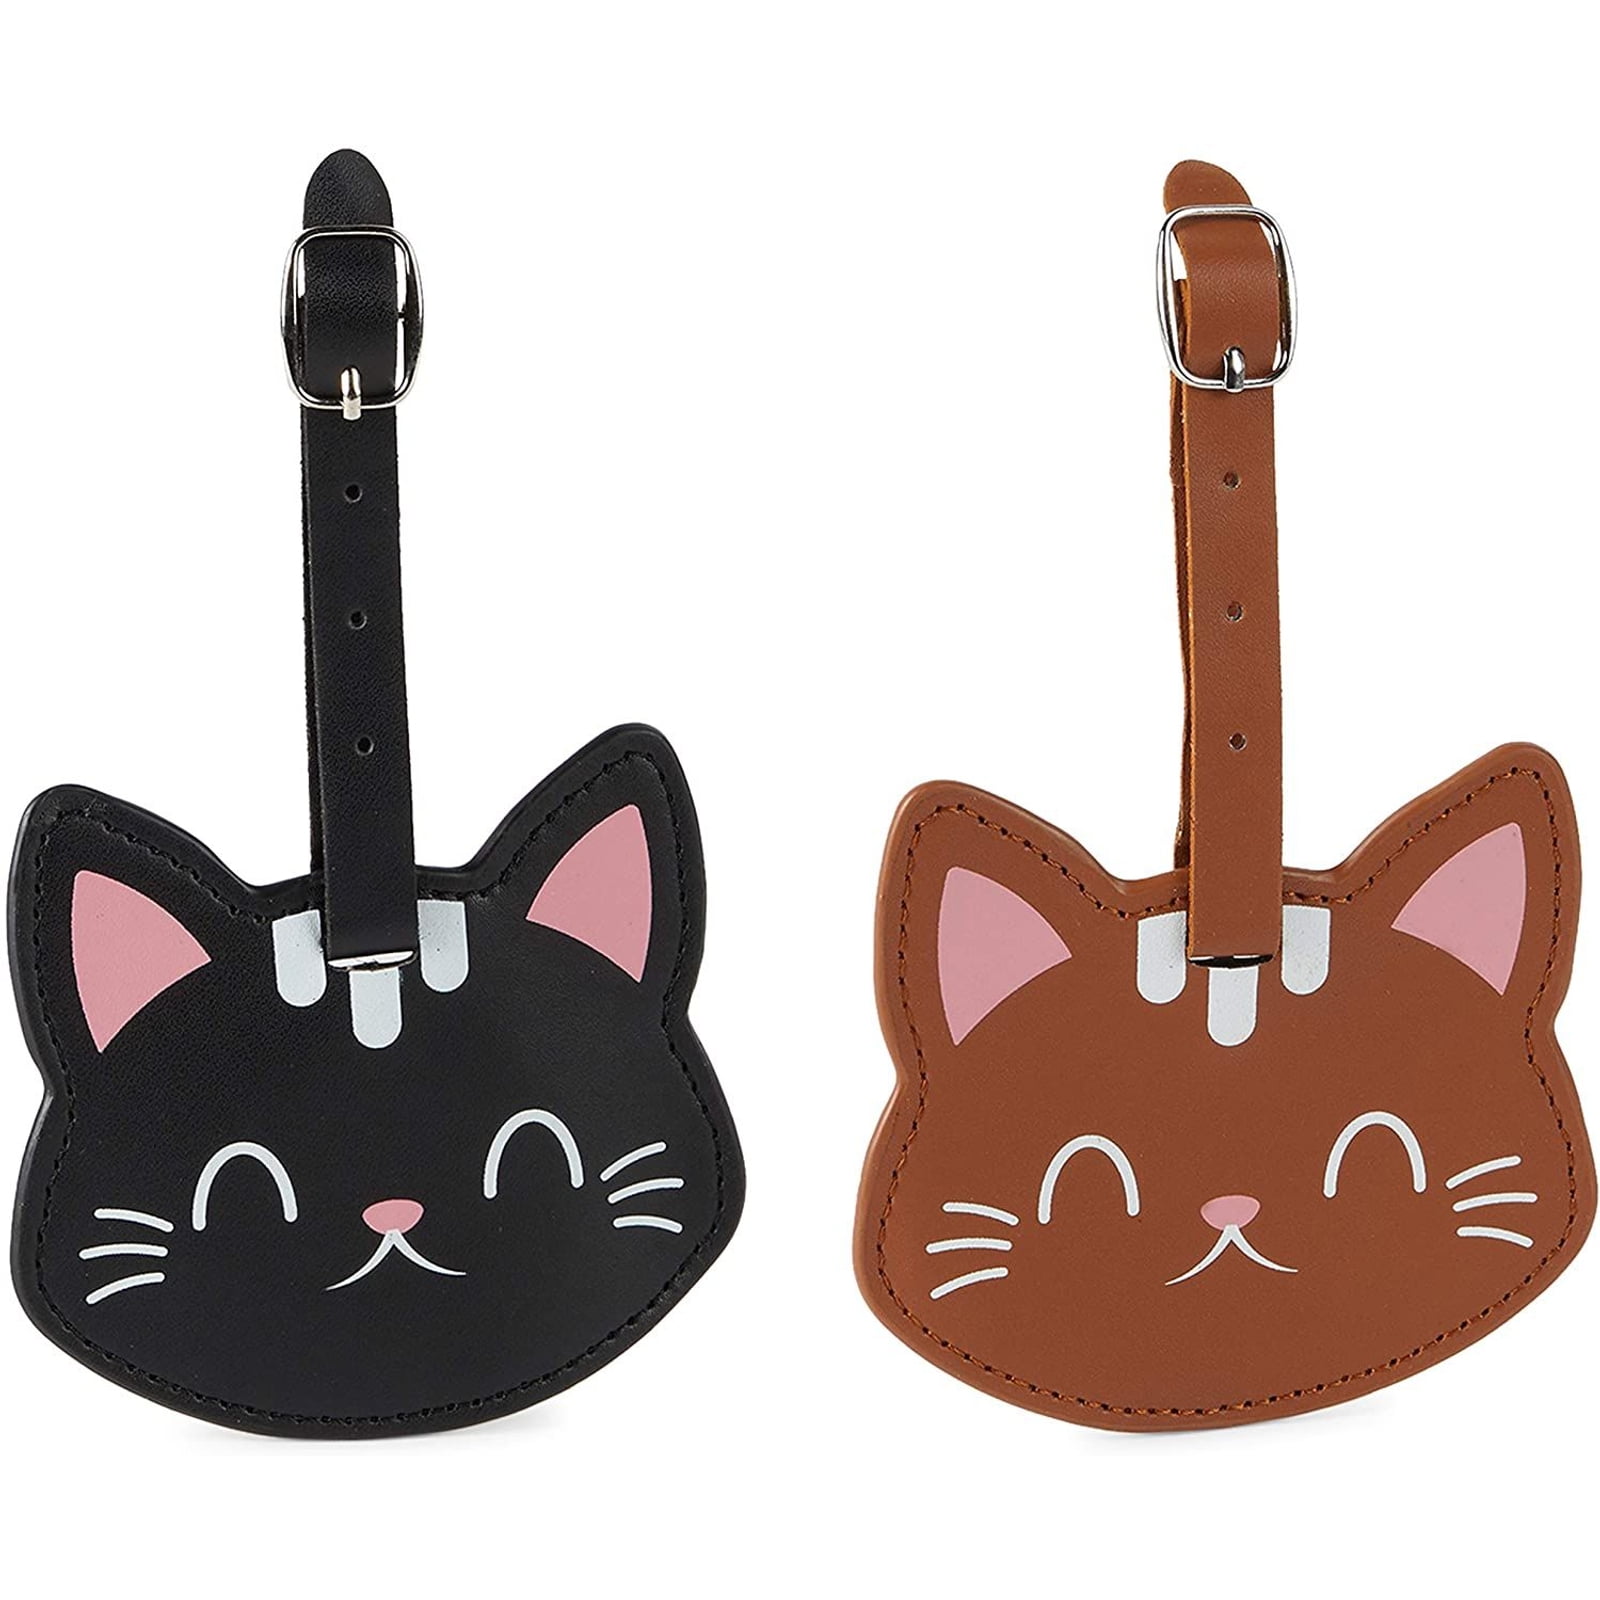 Luggage Tags Hipster Galaxy Kitten Cat Bag Tag for Travel 2 PCS 